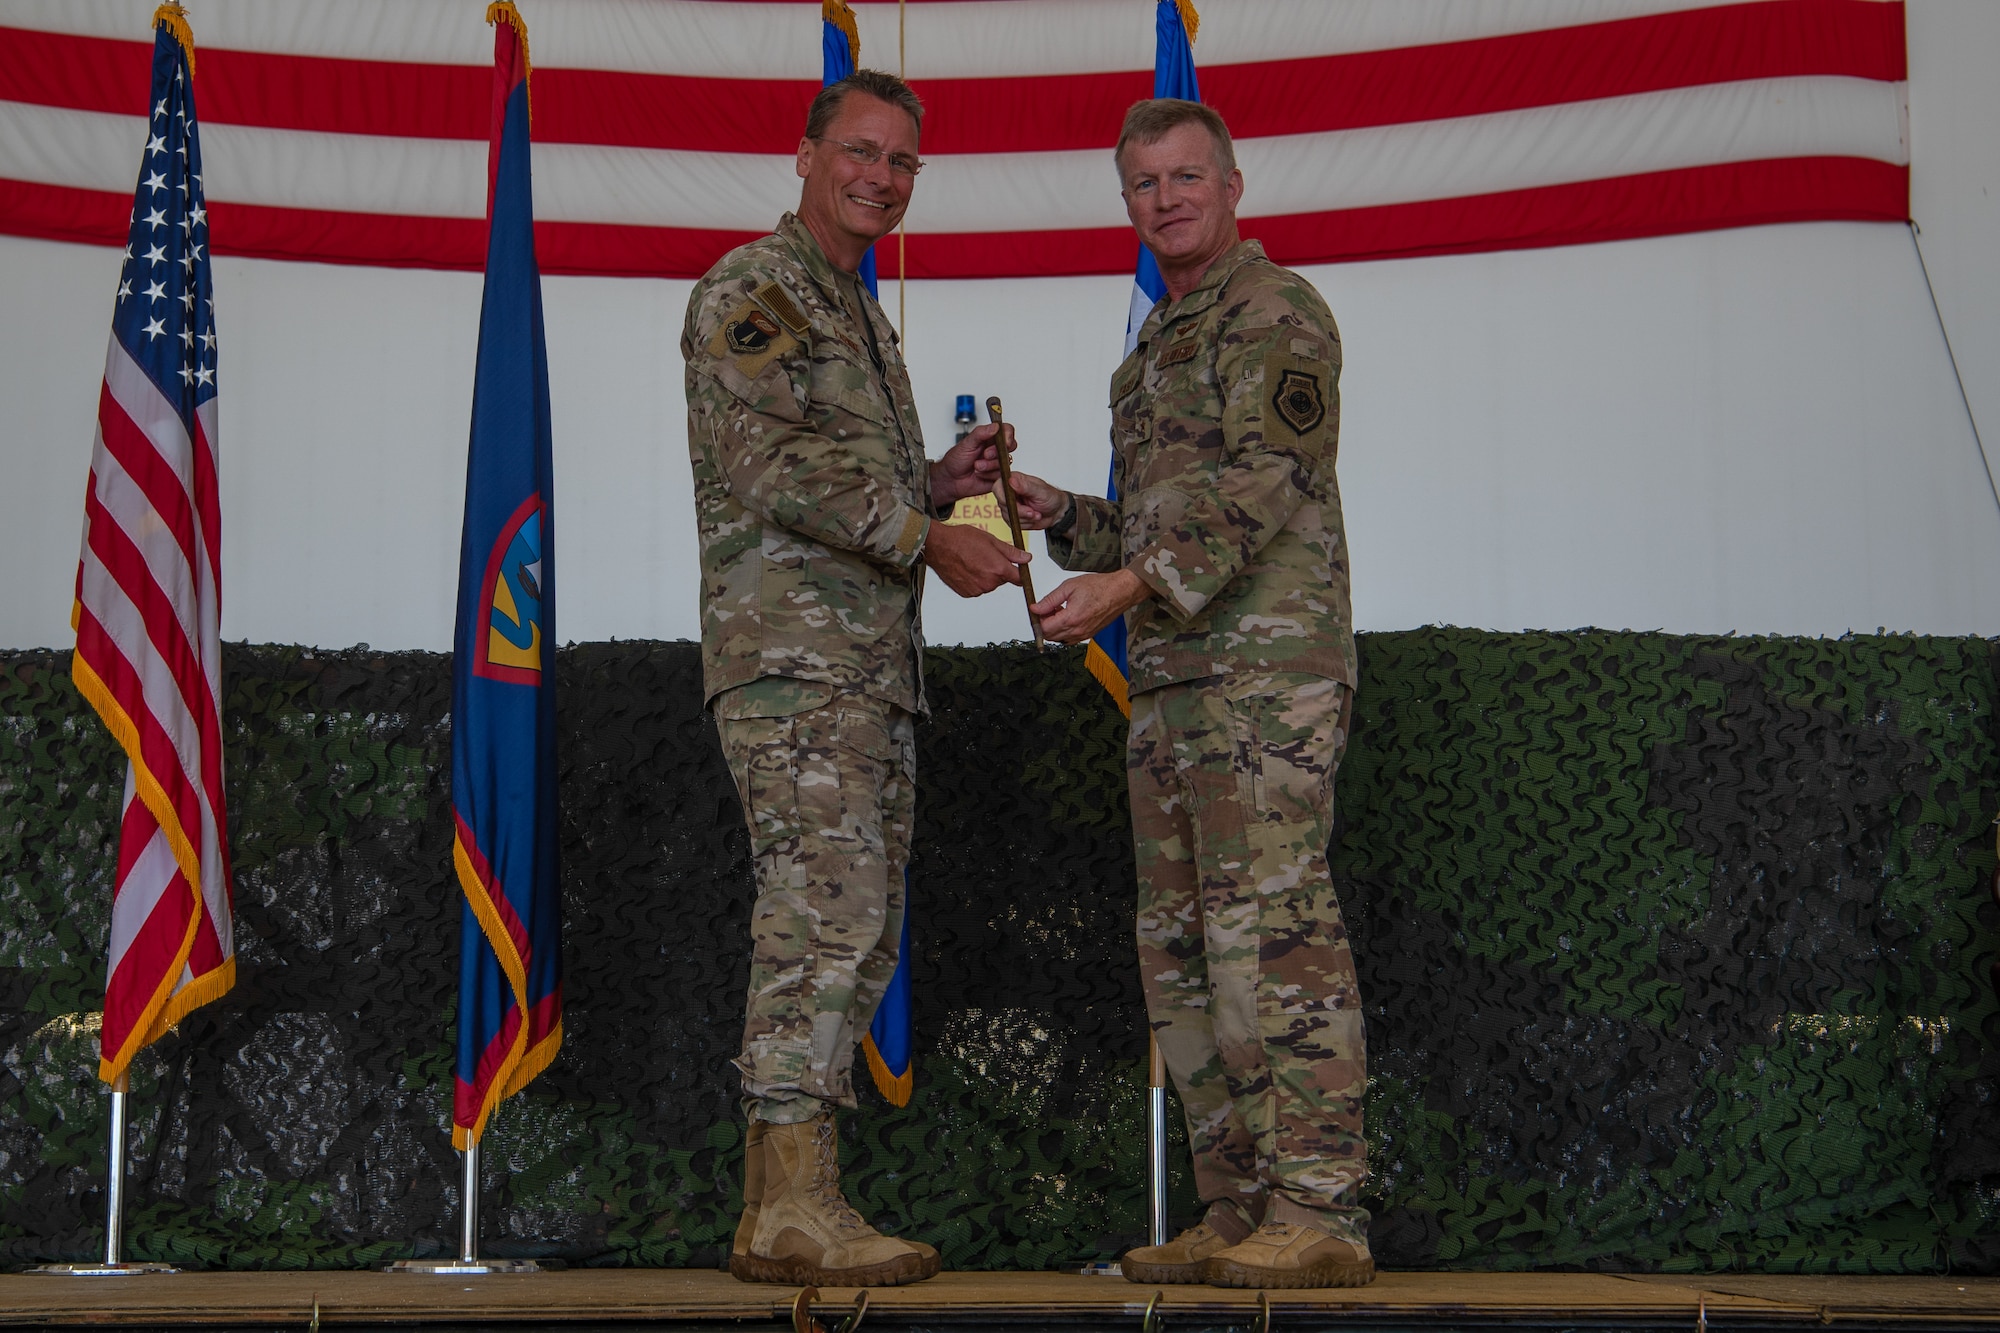 U.S. Air Force Brig. Gen. Thomas Palenske, 36th Wing commander receives a swagger stick from Brig. Gen. Paul Fast, during the 36th Wing change of command ceremony, June 30, 2023, at Andersen Air Force Base, Guam.